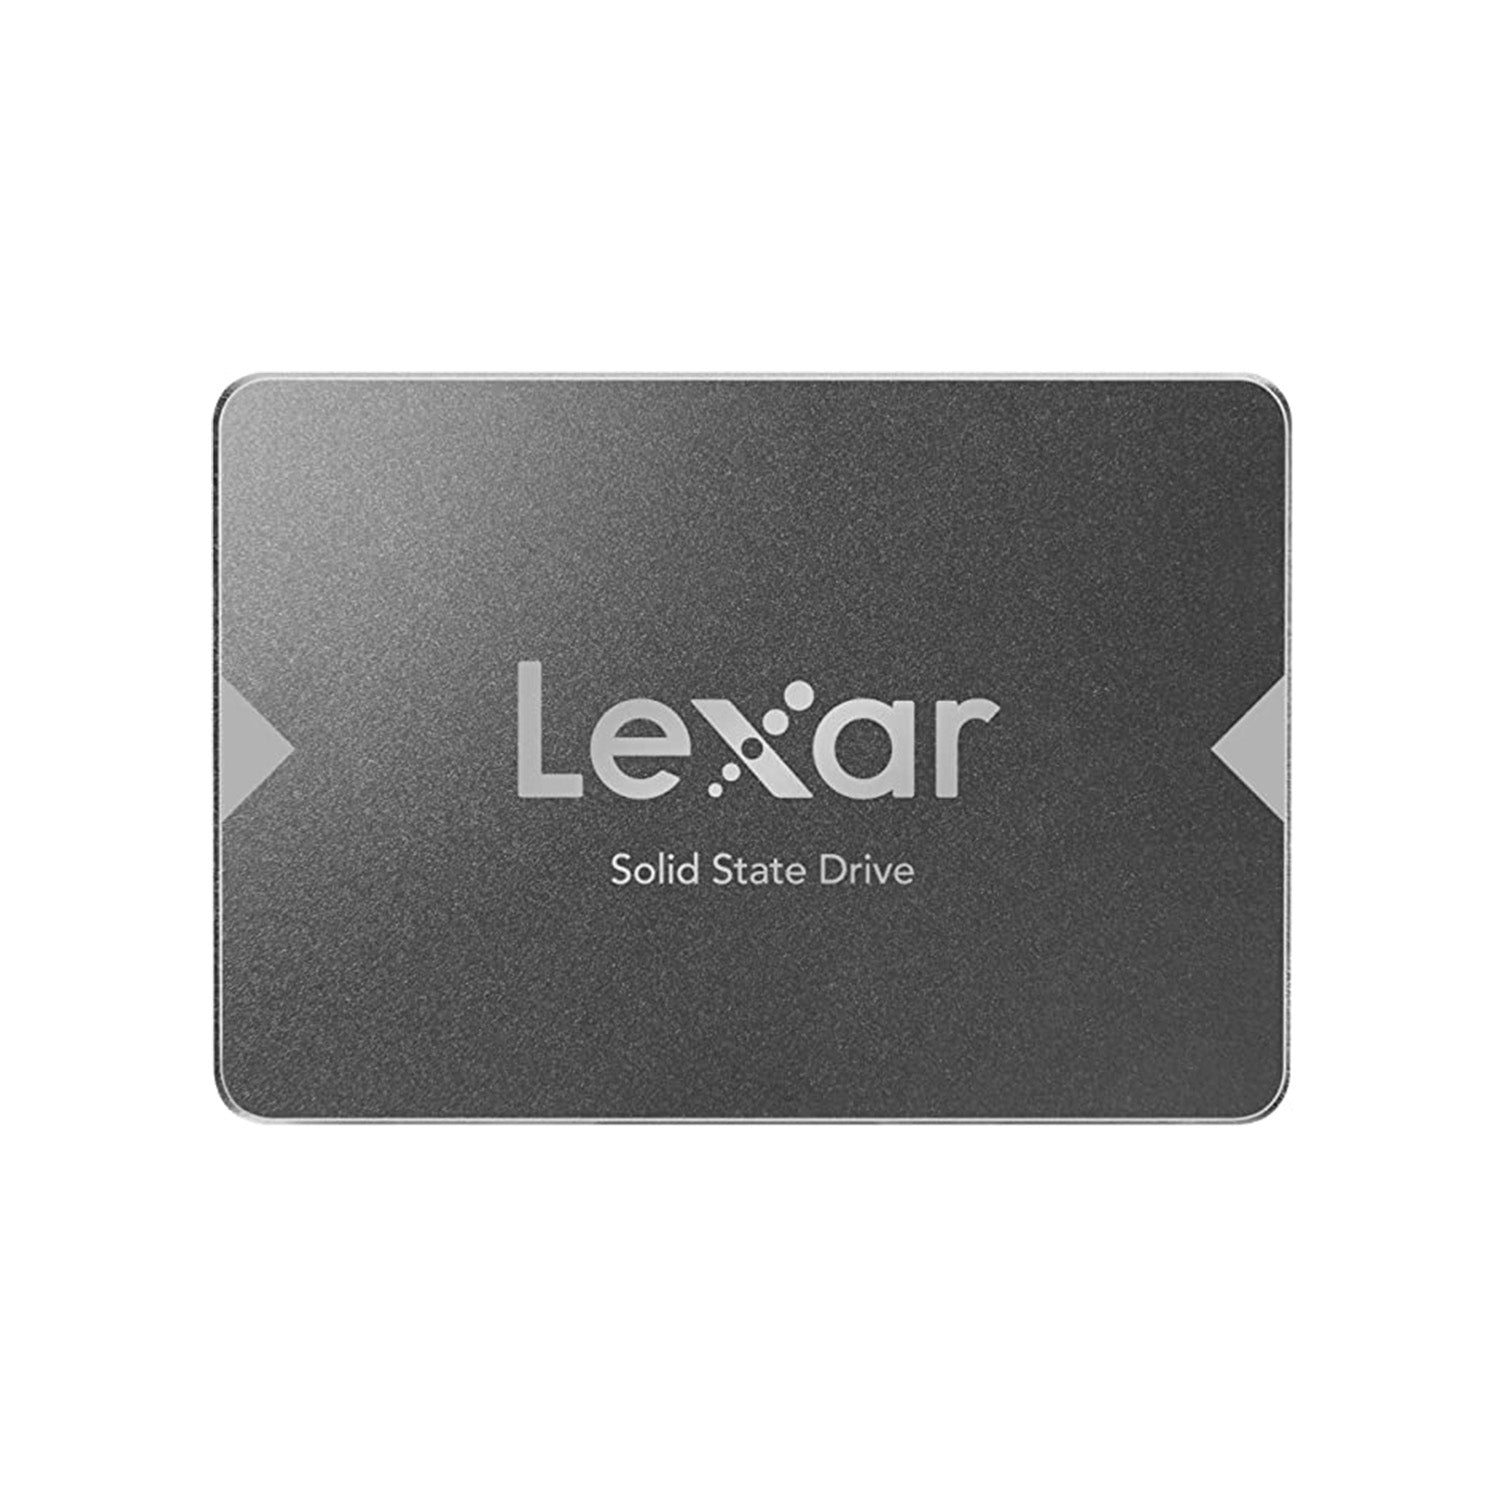 Lexar NS100 2.5 Inch SATA III Solid State Drive  2TB Internal SSD, Up to 550 MB/s Sequential Read Speed Micro SATA Form Factor (LNS100-2TRBNA)